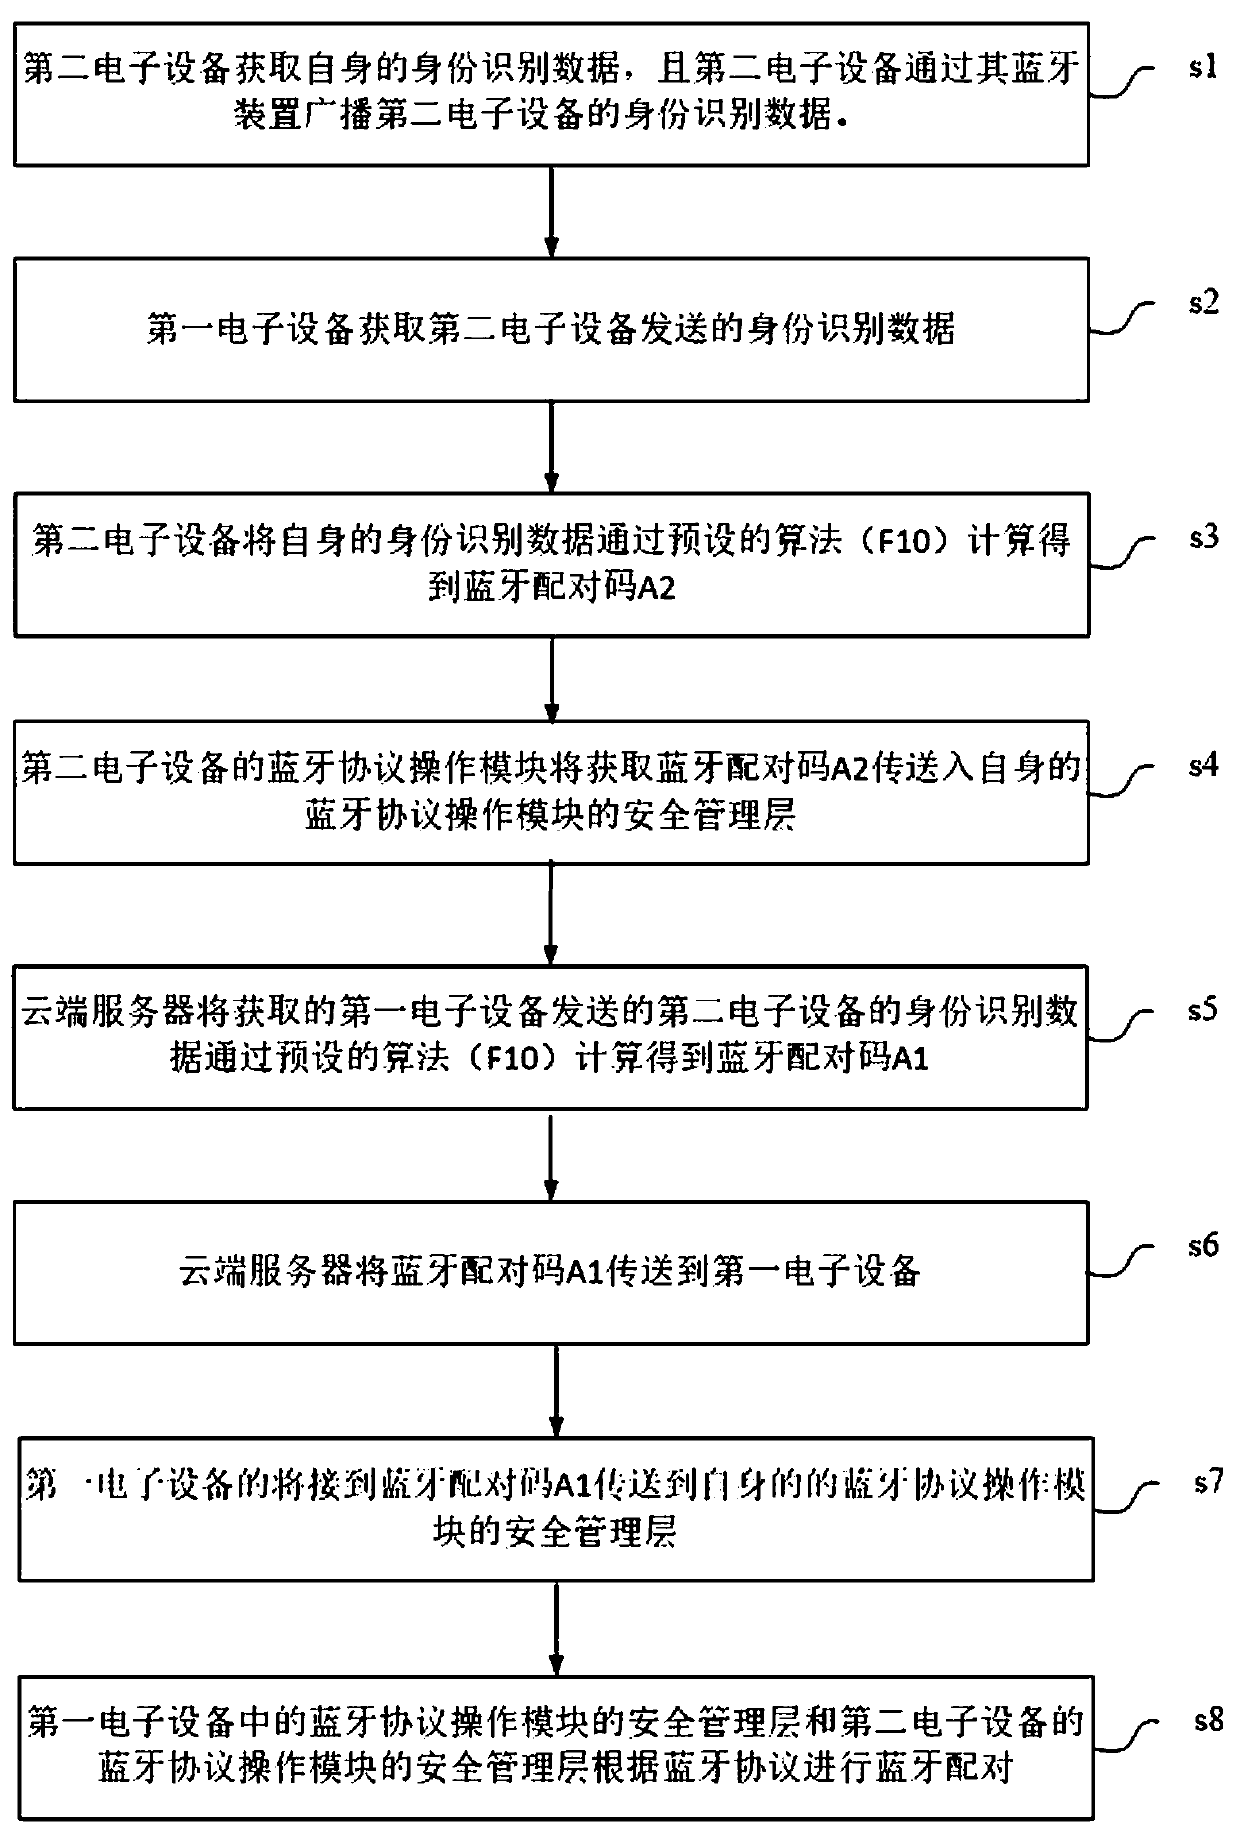 Bluetooth pairing code allocation method, system, terminal, server and vehicle-mounted device